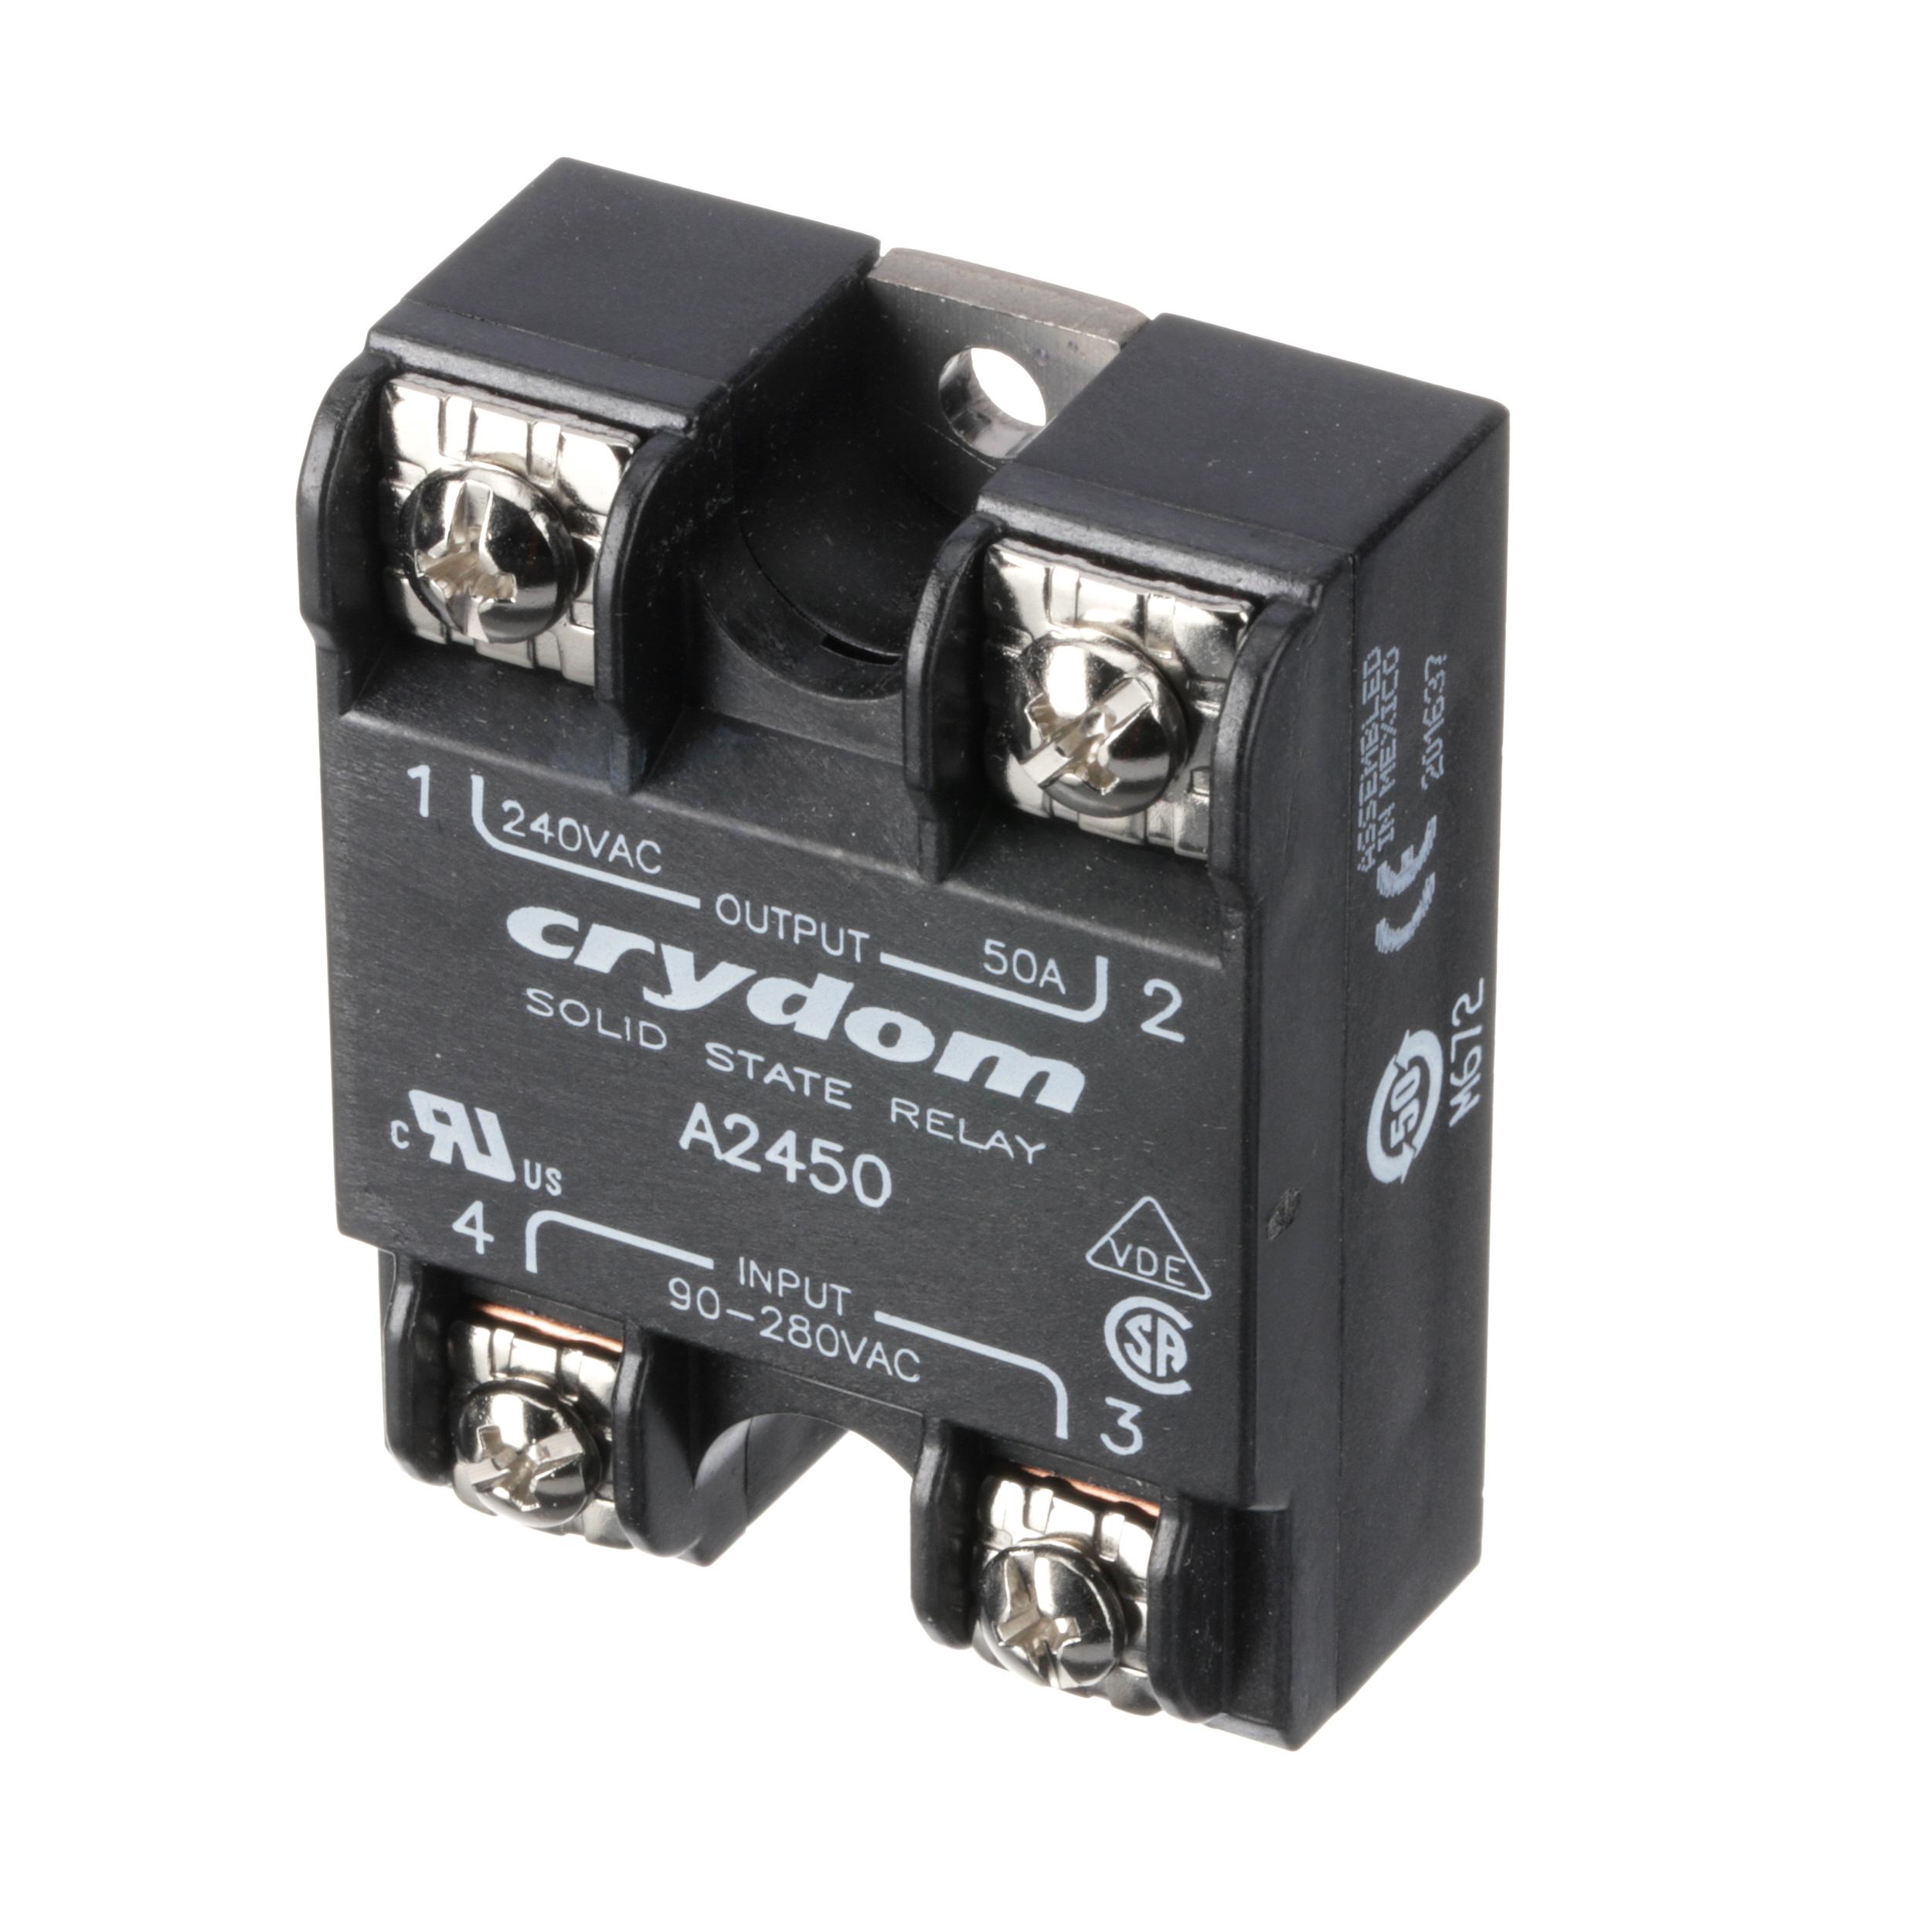 MARSHALL AIR SYSTEMS SOLID STATE RELAY | Part #503934